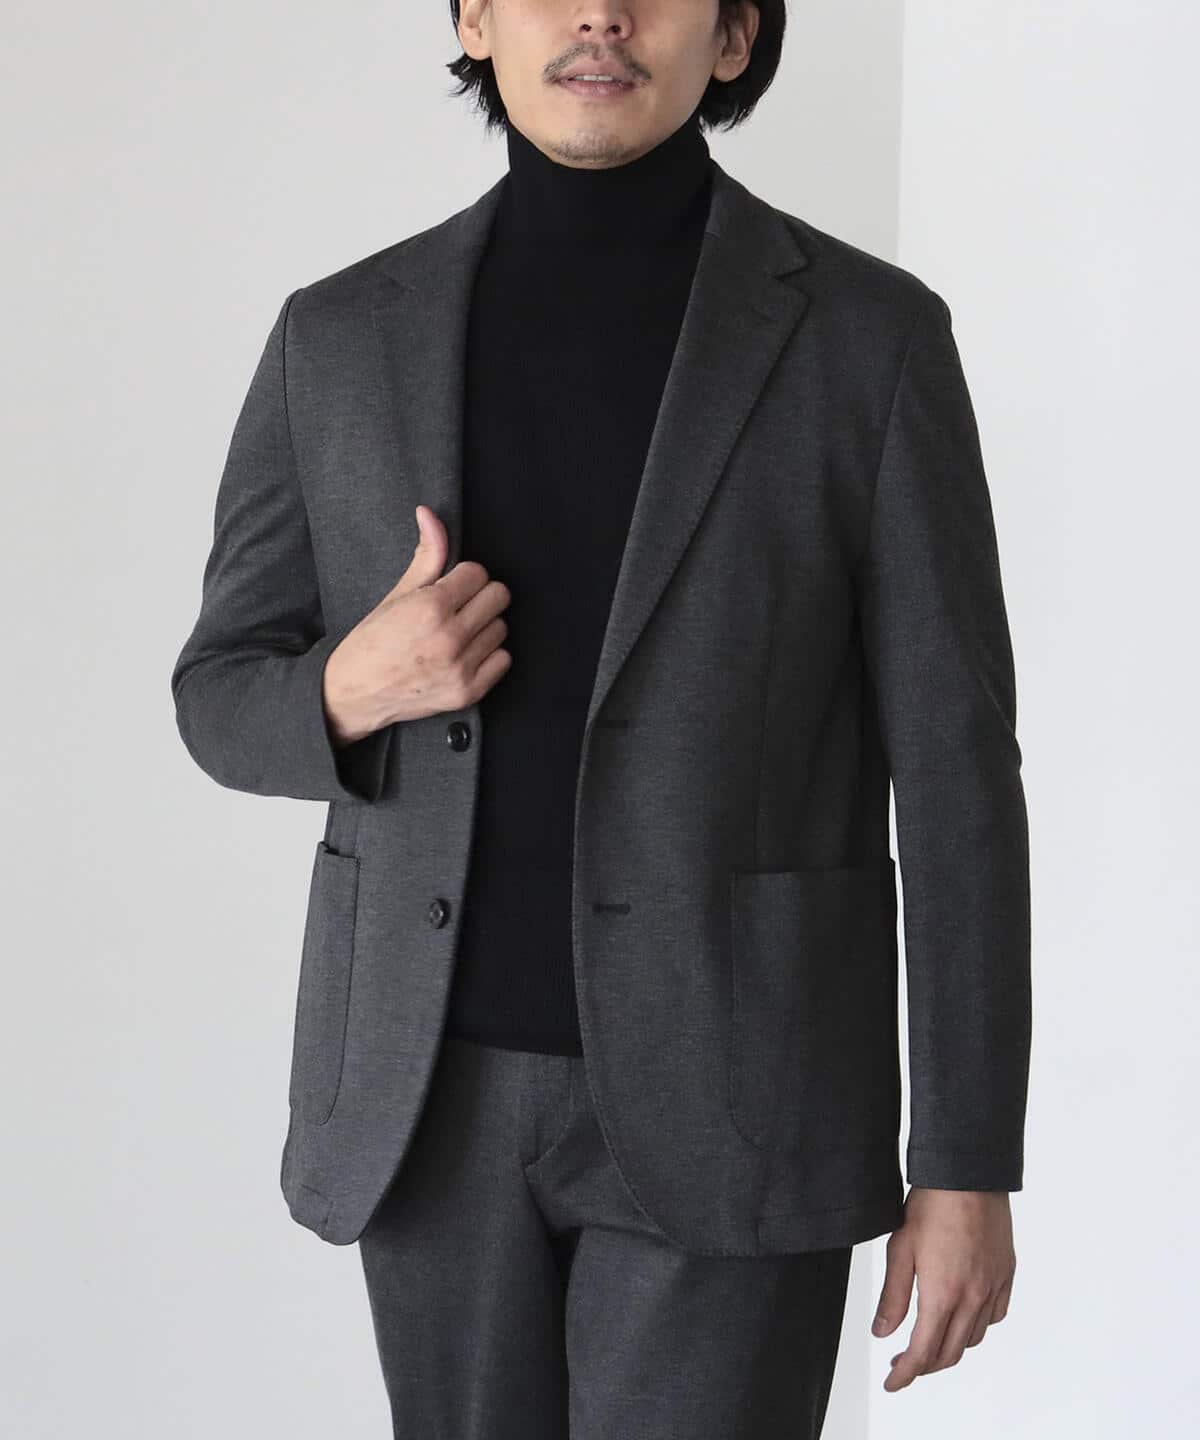 [Outlet] BEAMS HEART / Fleece-lined jersey 2-button jacket